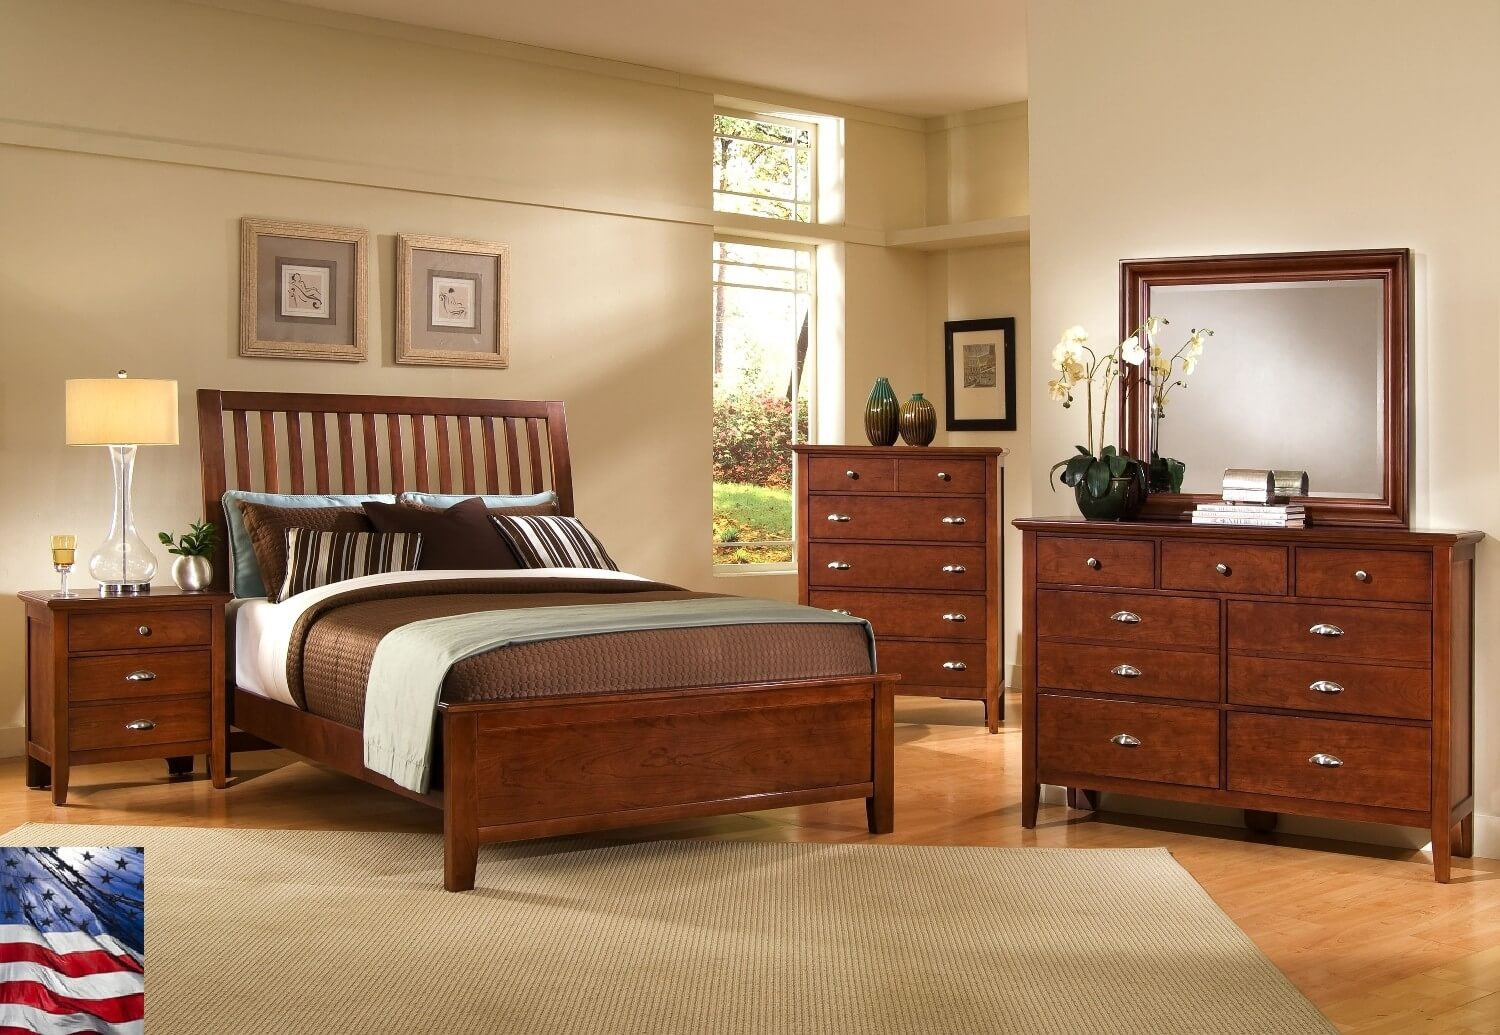 Beautiful Bedroom Colors
 Bedroom Colour Schemes with Oak Furniture Color Interior